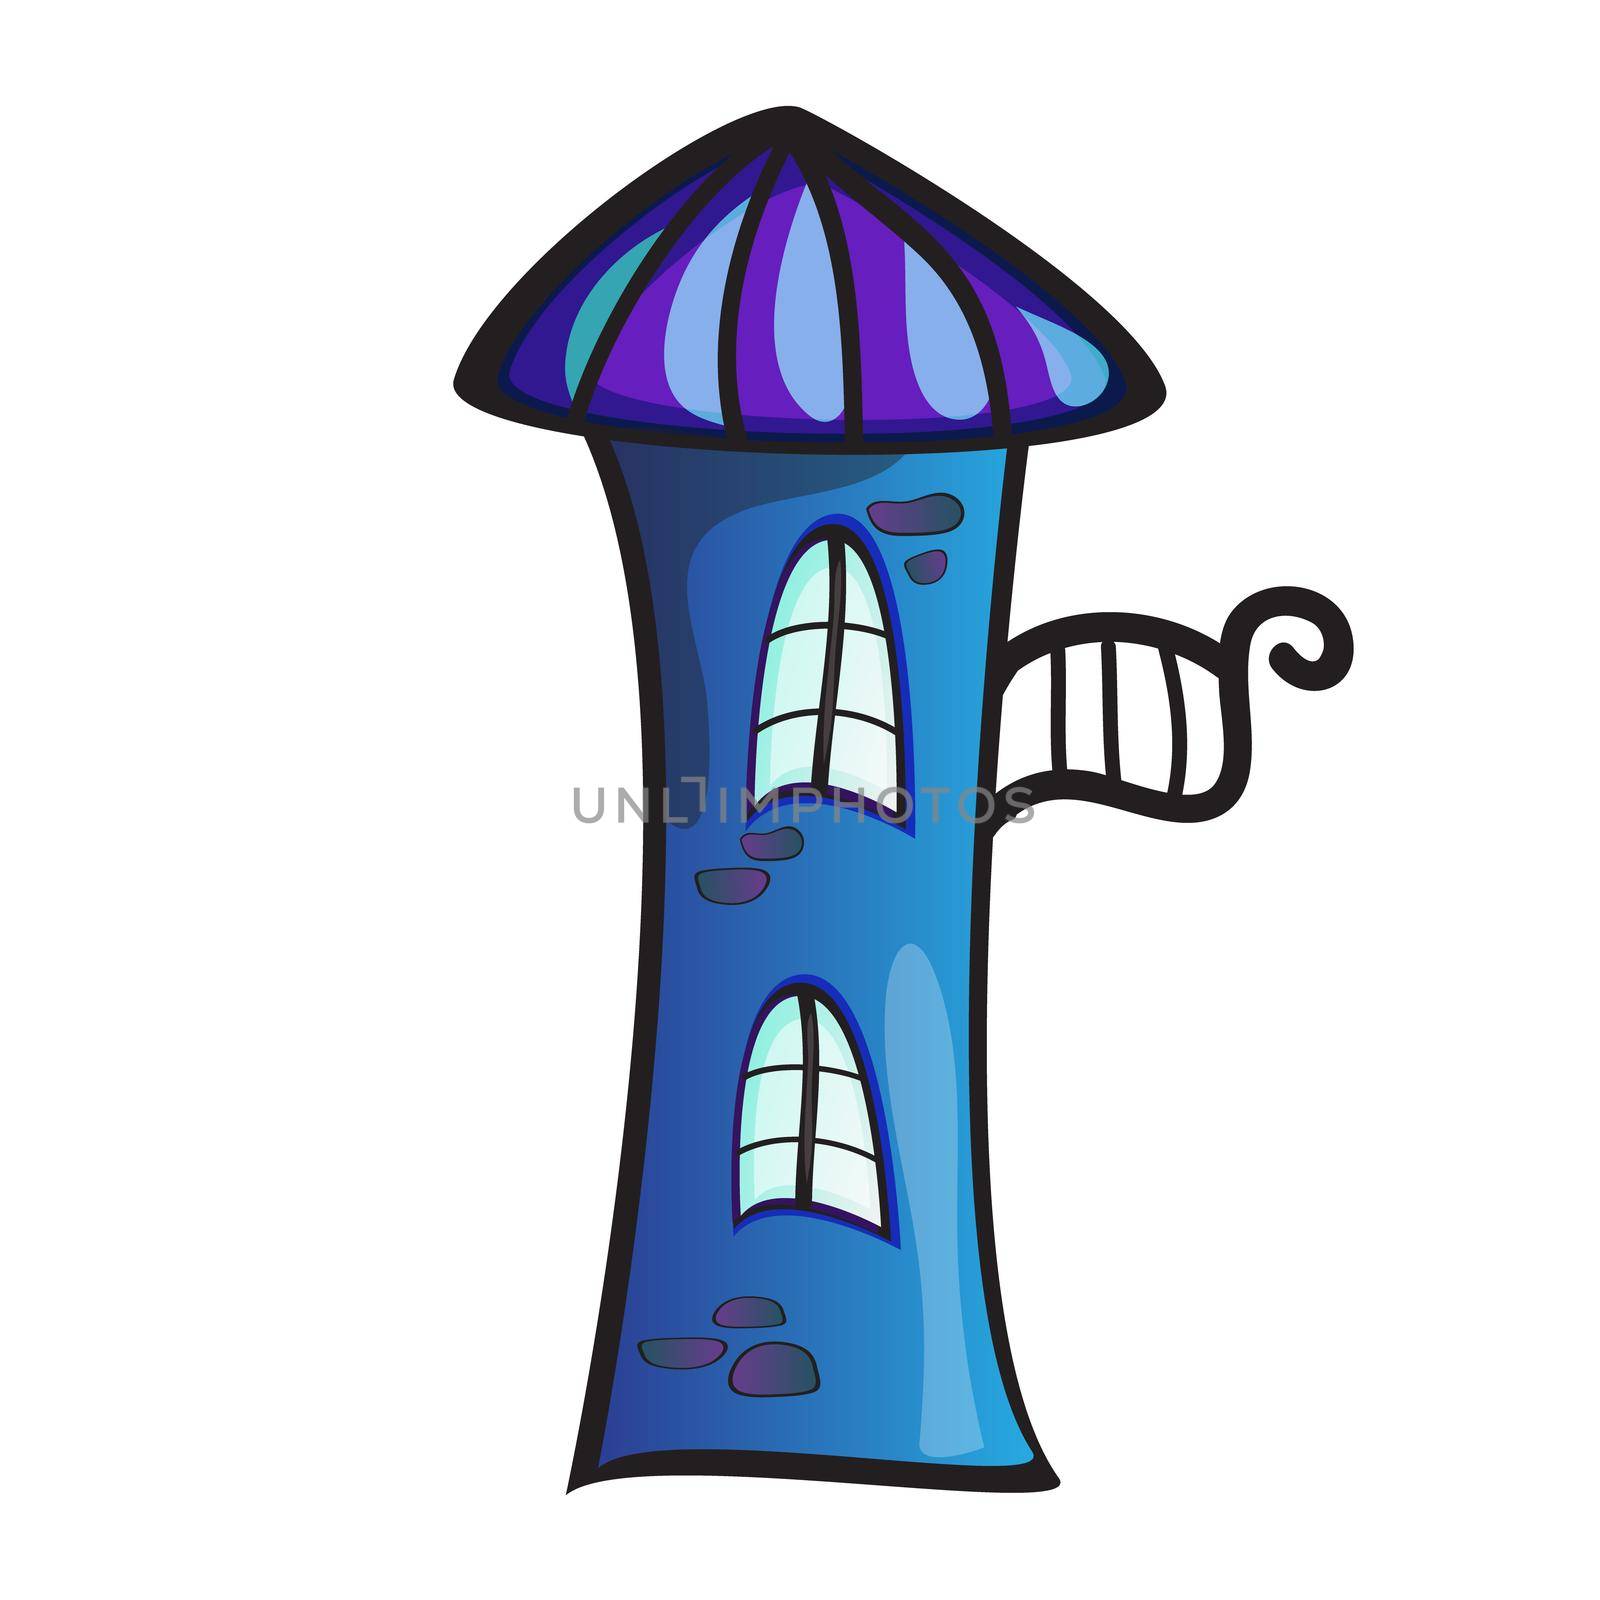 Fairytale blue stone towers with balcony in cute cartoon style. Vector illustration on white